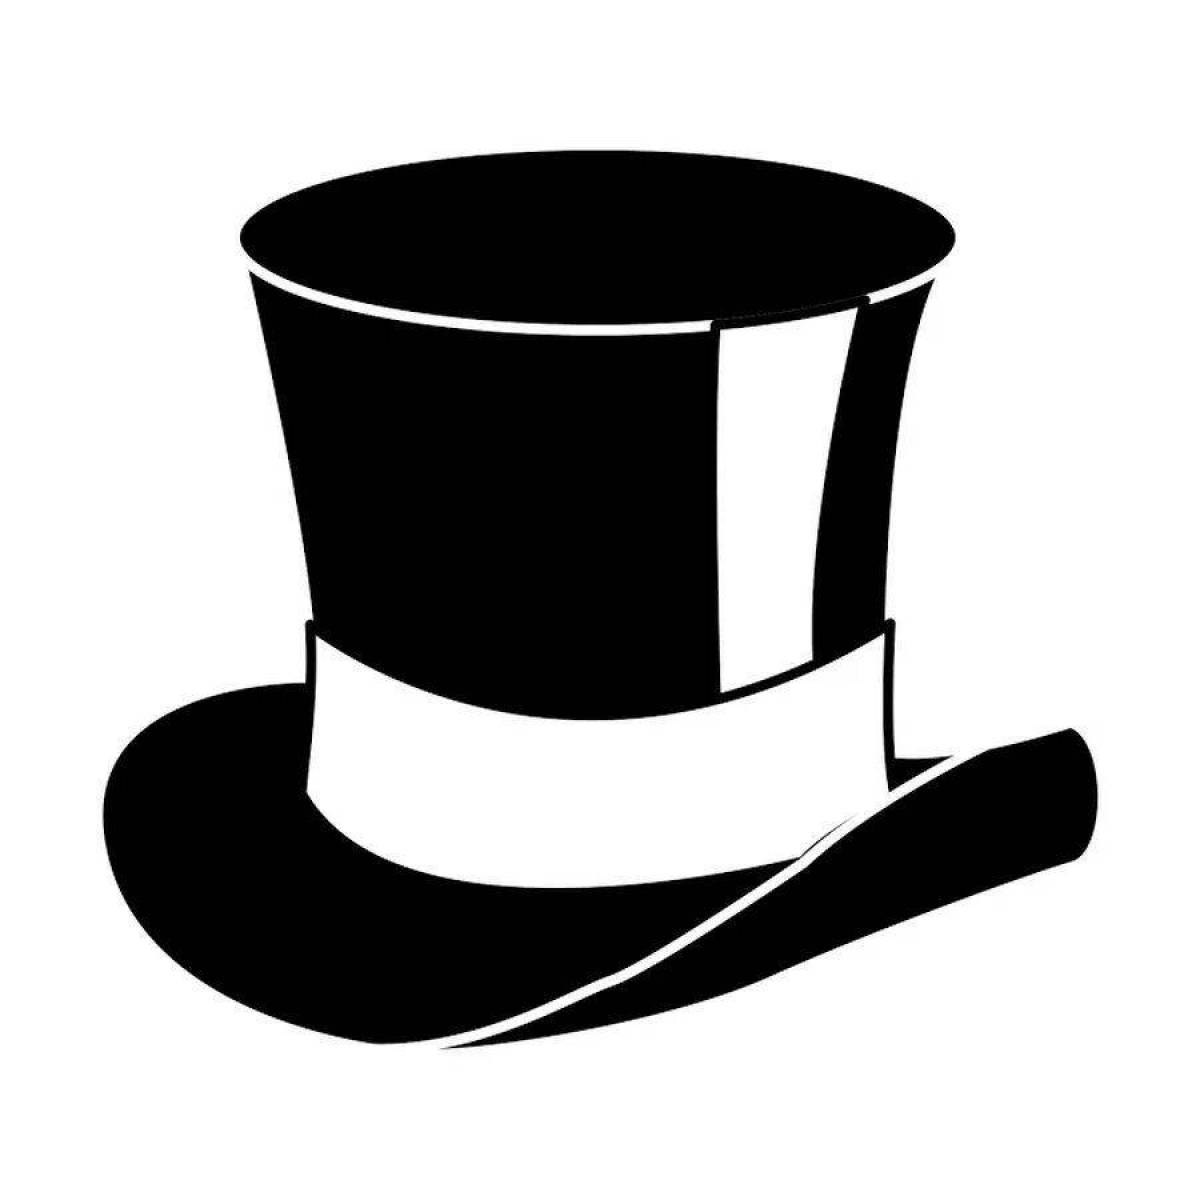 Coloring page amazing cylinder hat